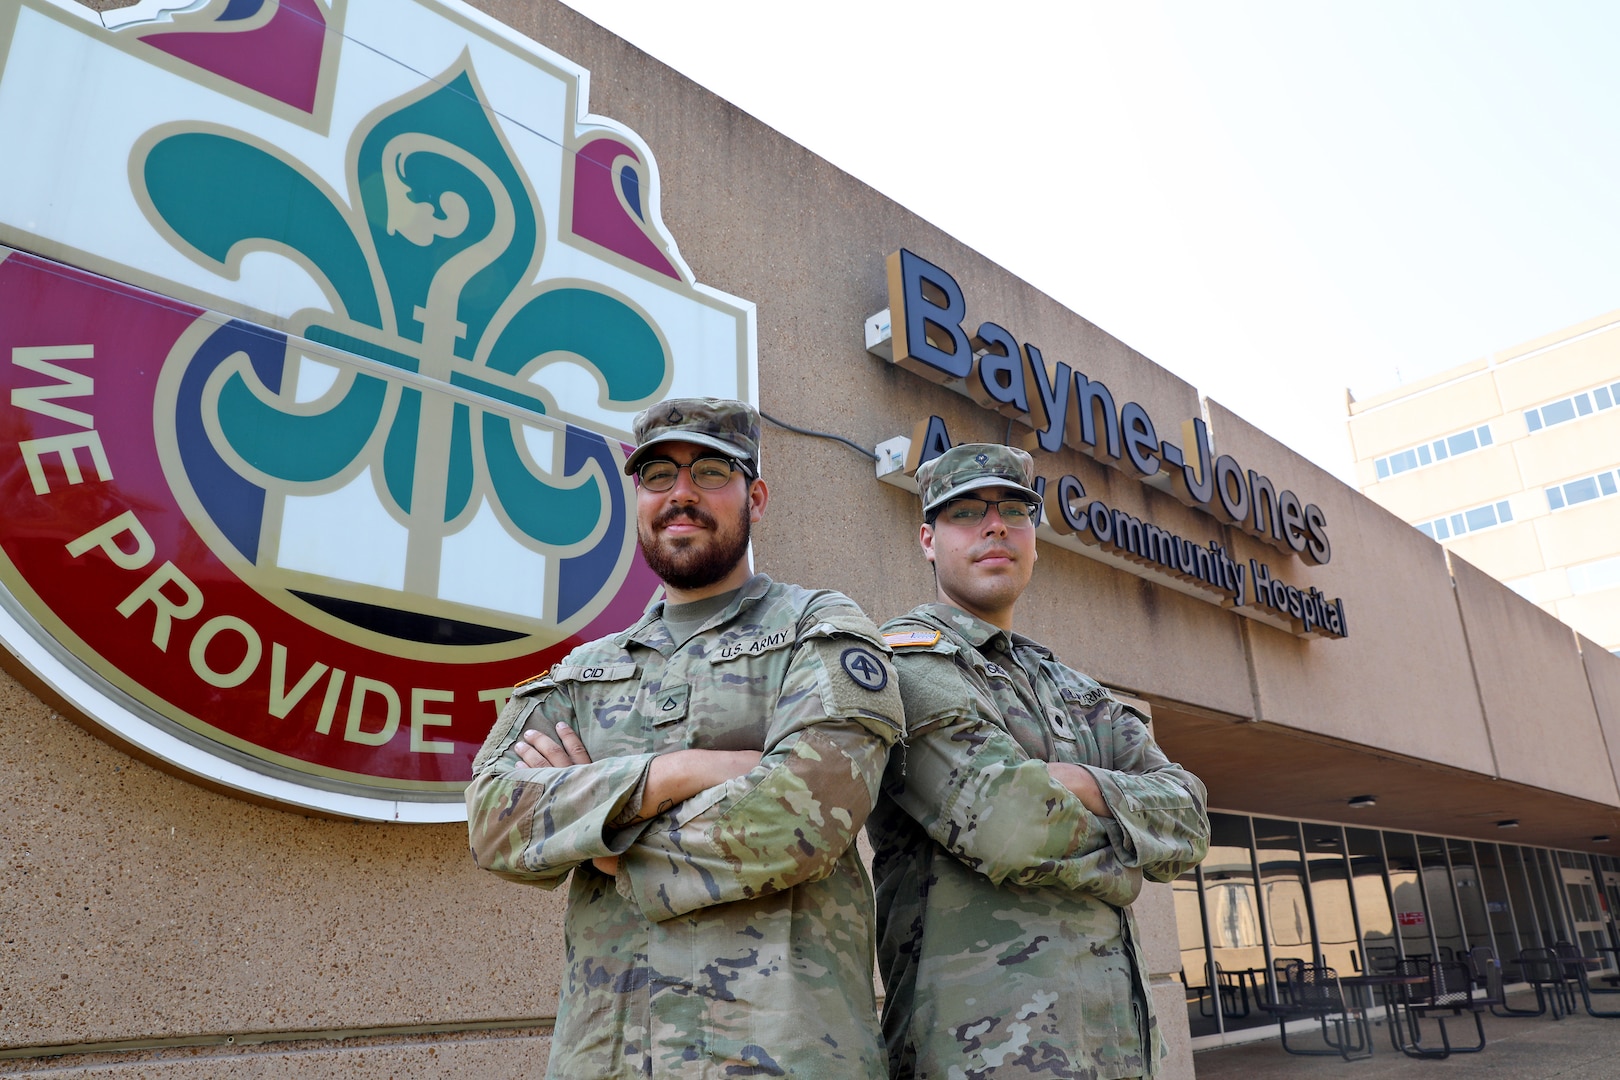 Twin brothers and Soldiers pose in front of the BJACH sign.